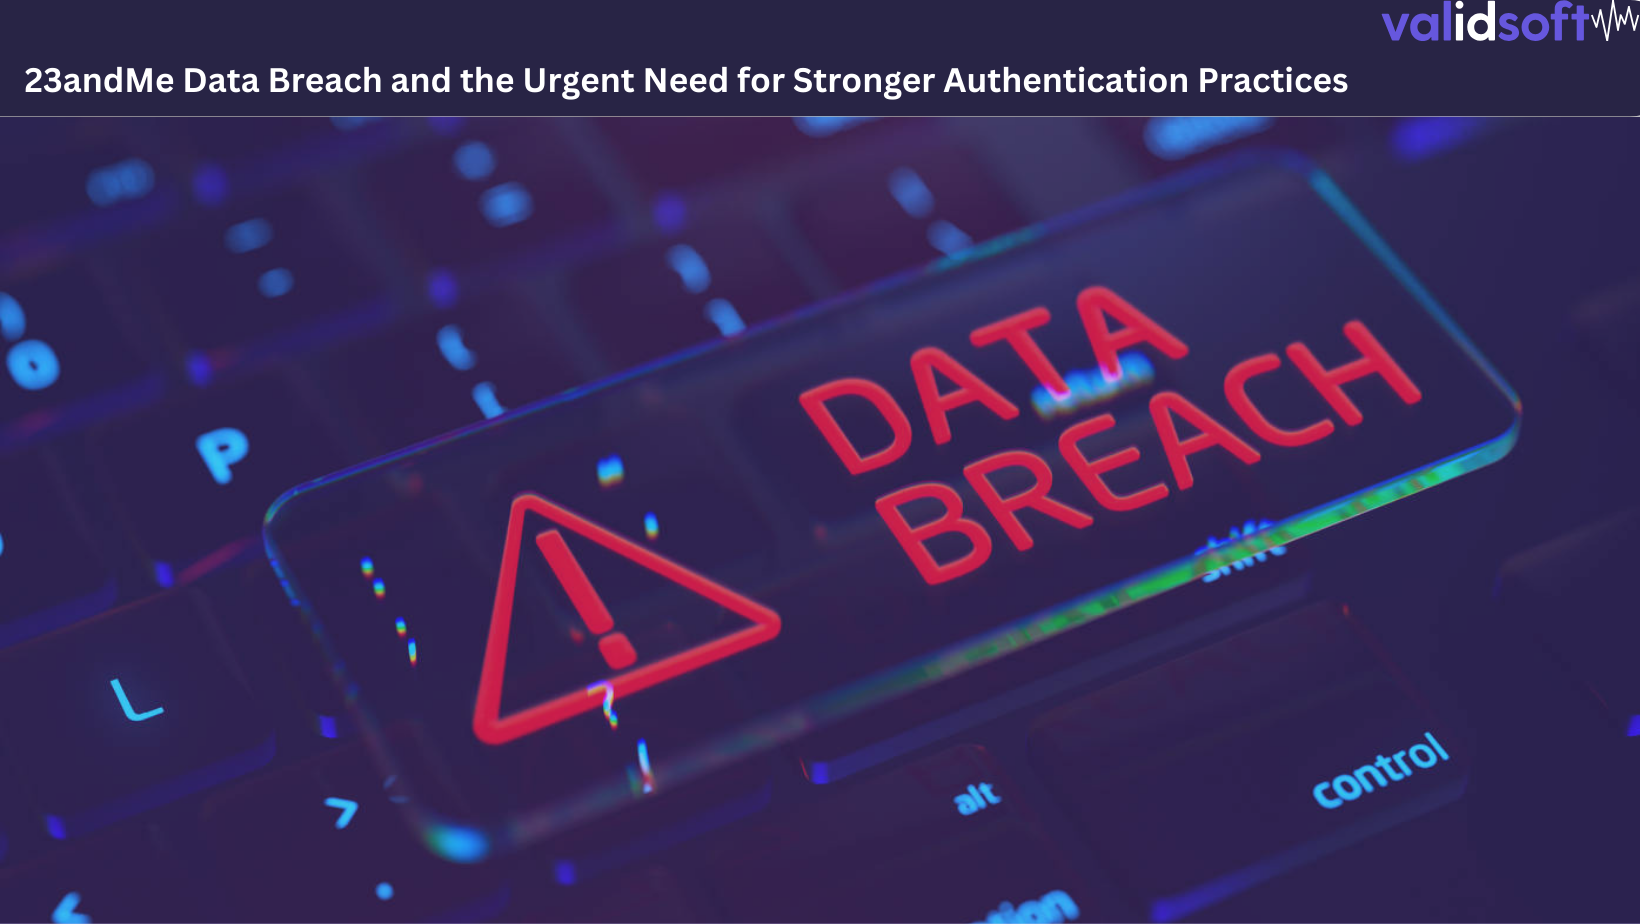 23andMe Data Breach and the Urgent Need for Stronger Authentication Practices